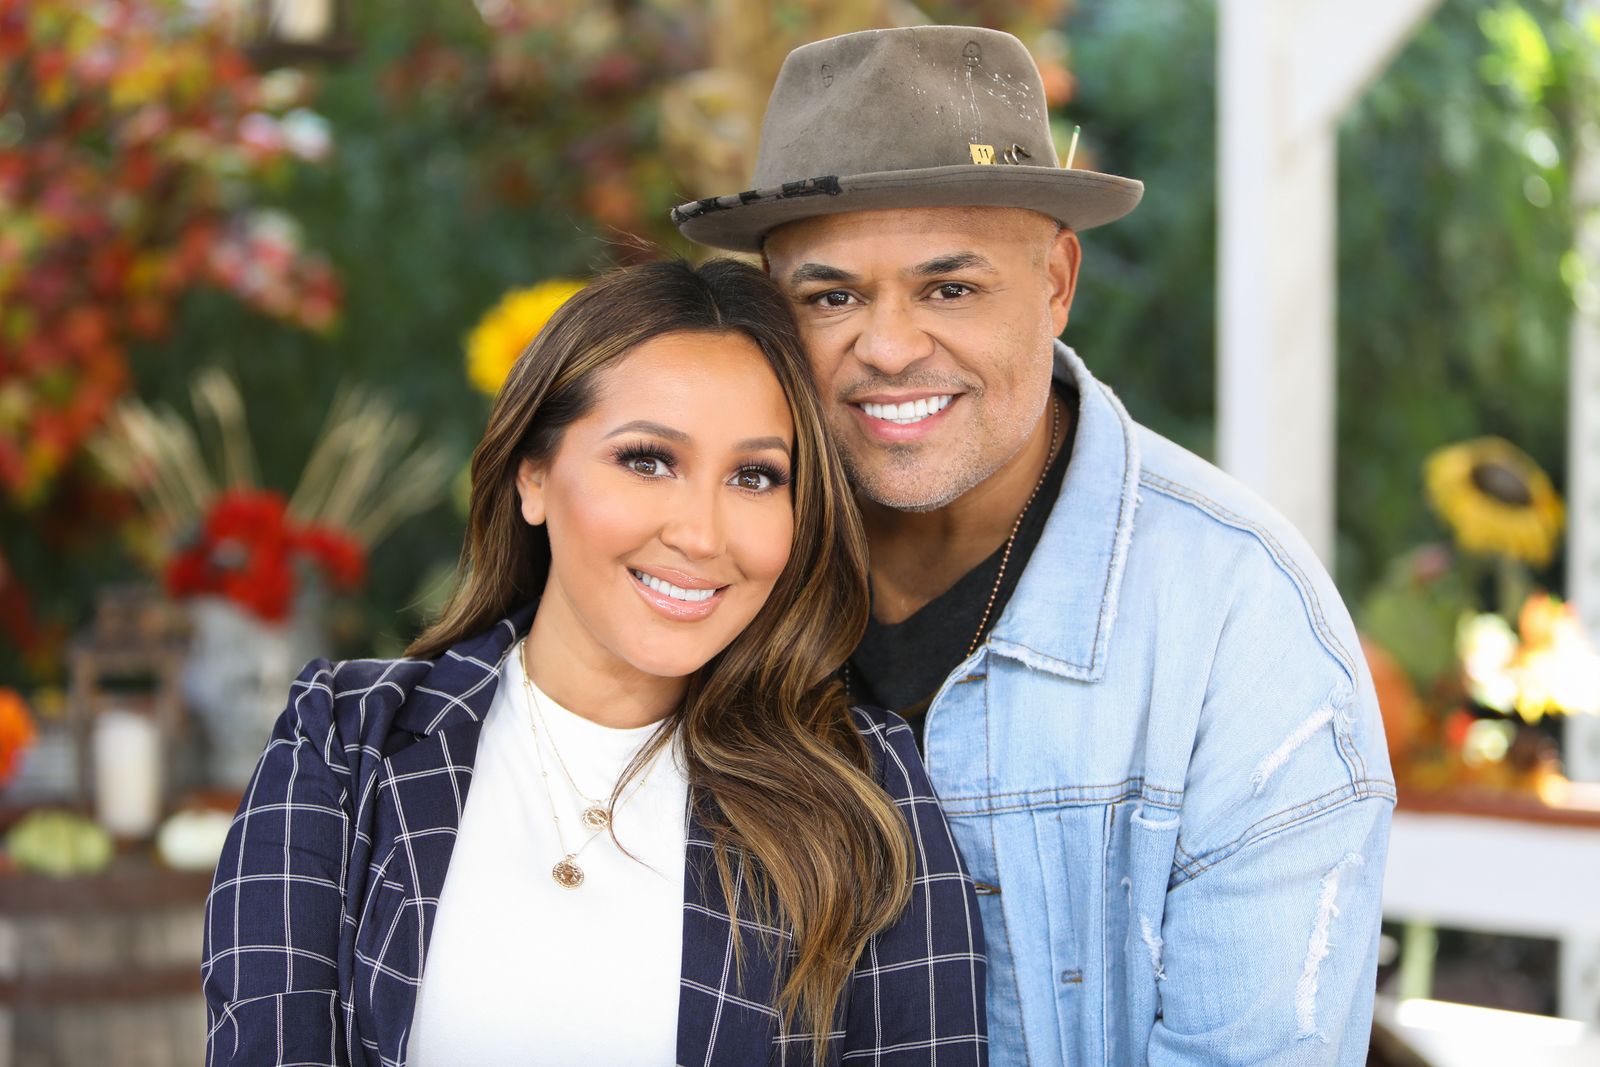 Adrienne Houghton and Israel Houghton at Hallmark's "Home & Family" on October 5, 2018 | Photo: Getty Images